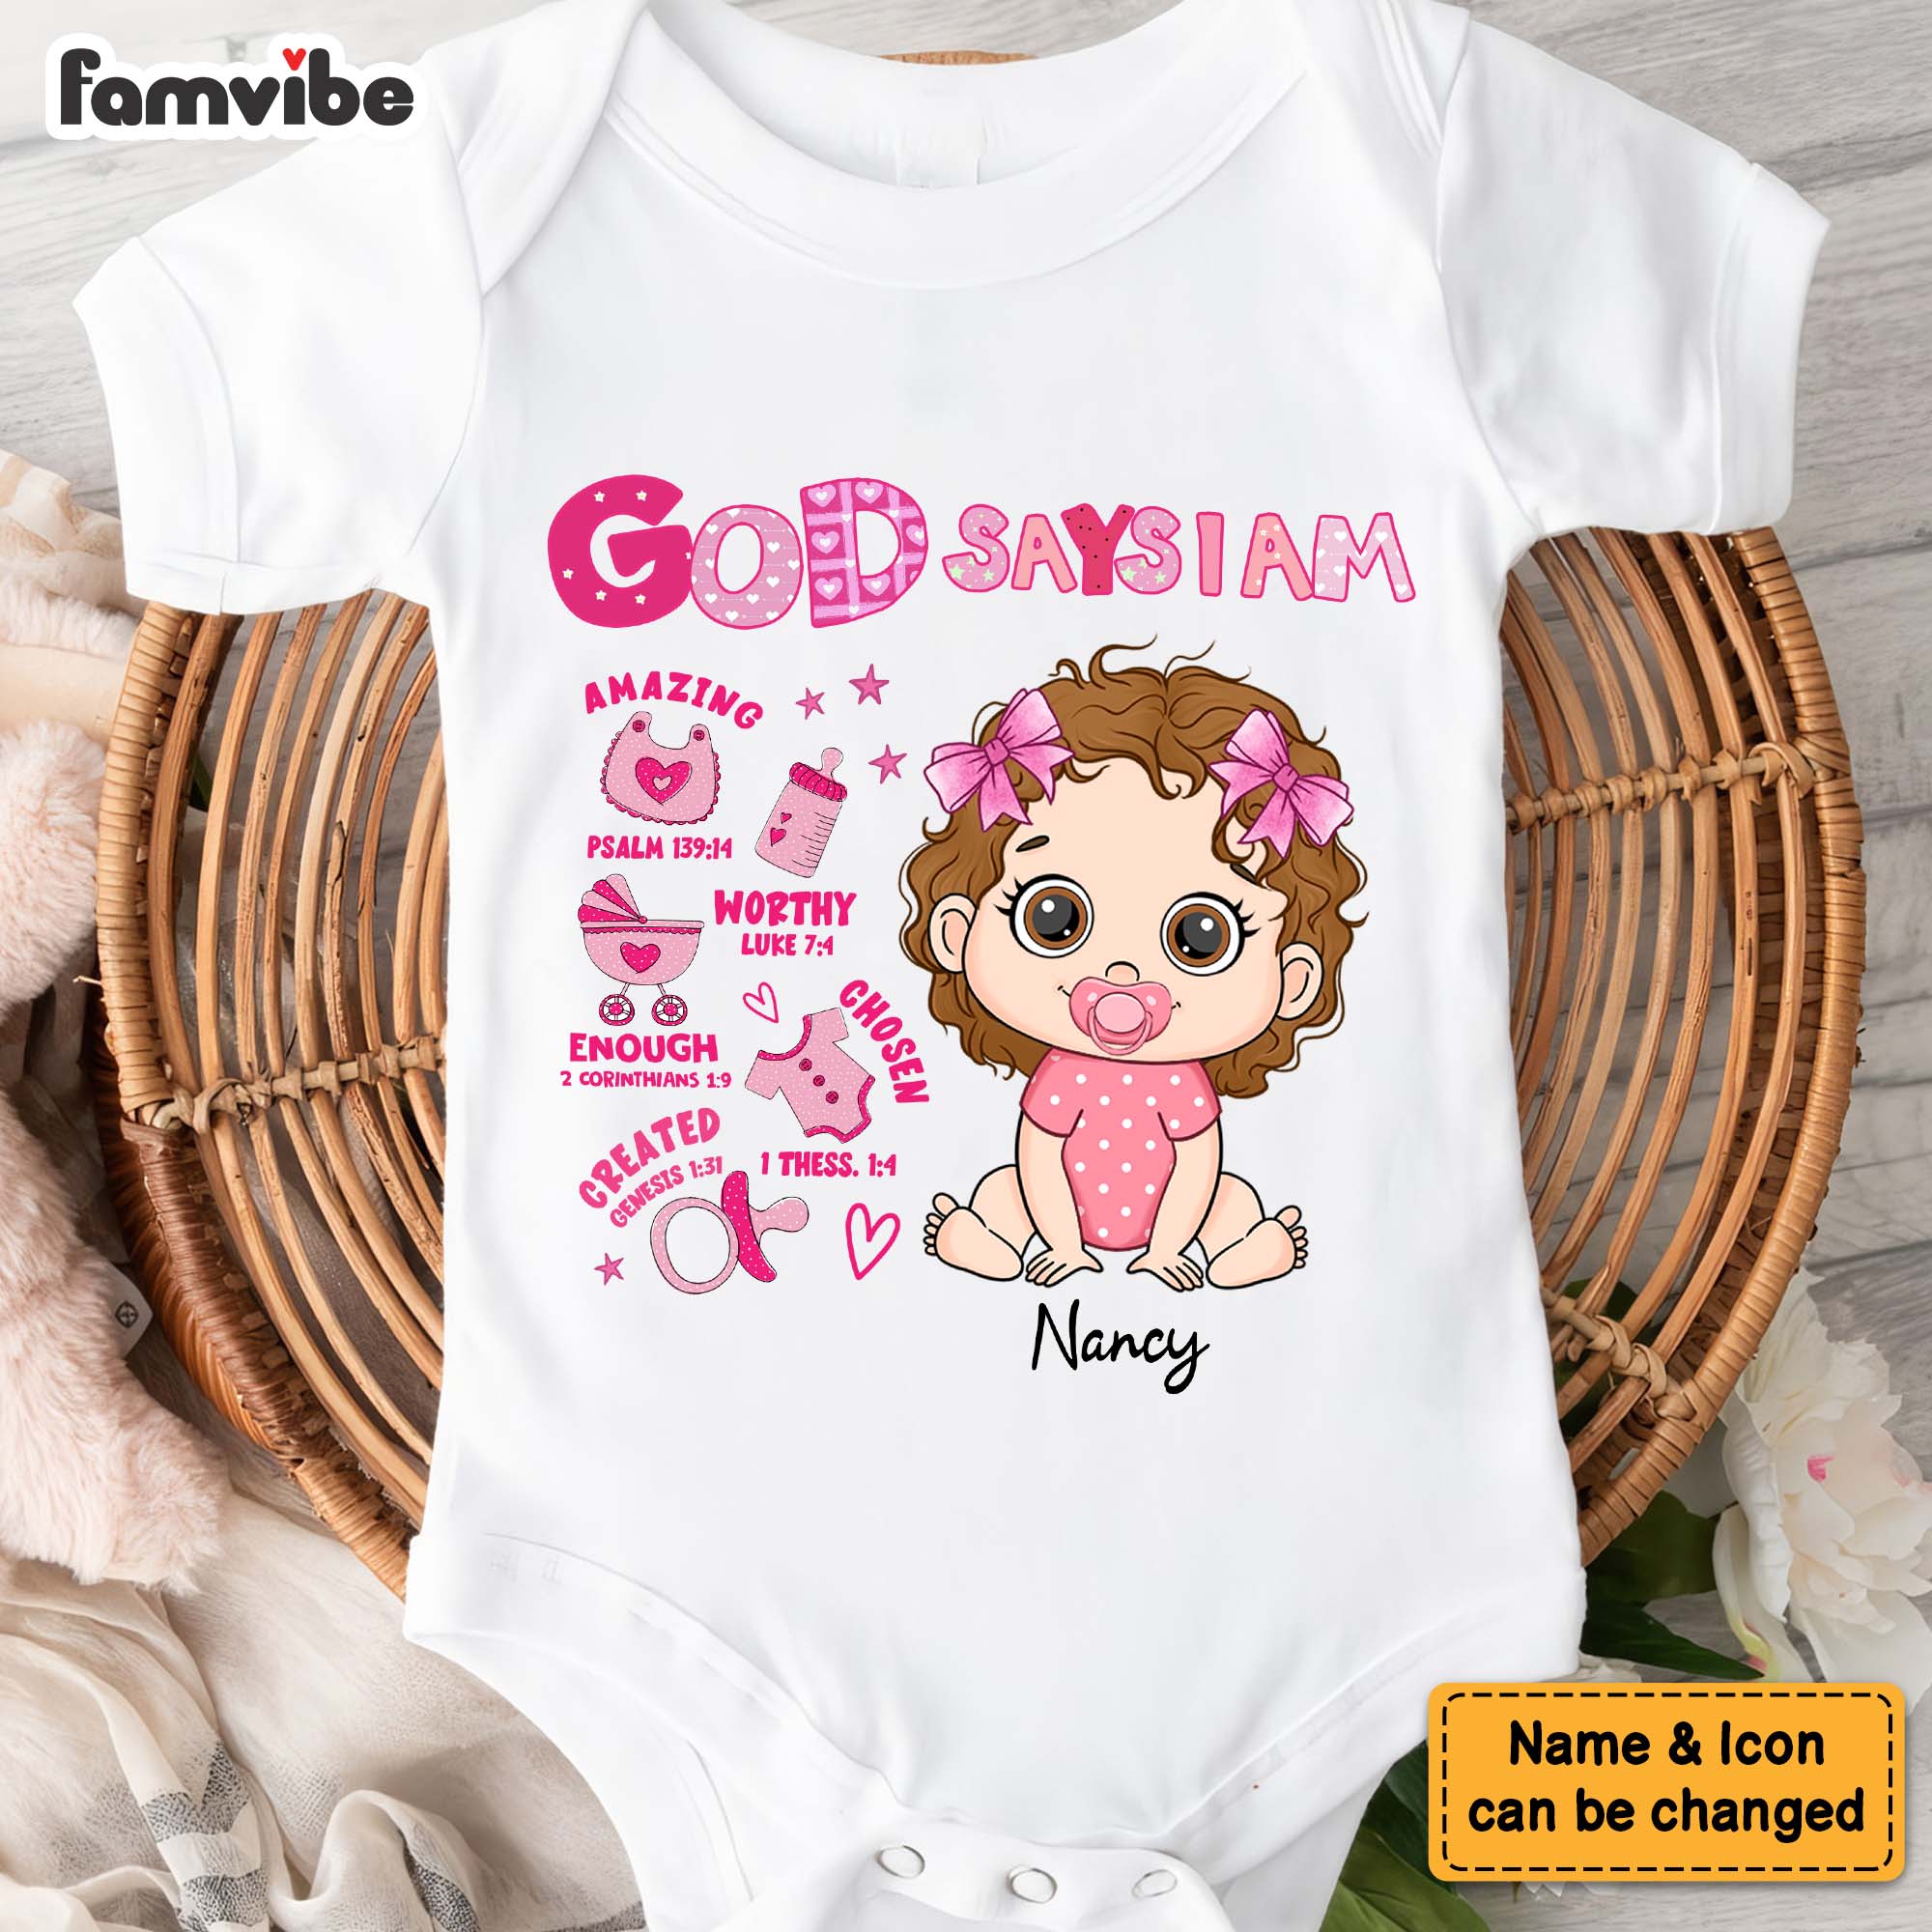 Personalized Gift For Baby God Says Baby Shower Theme Baby Onesie 31376